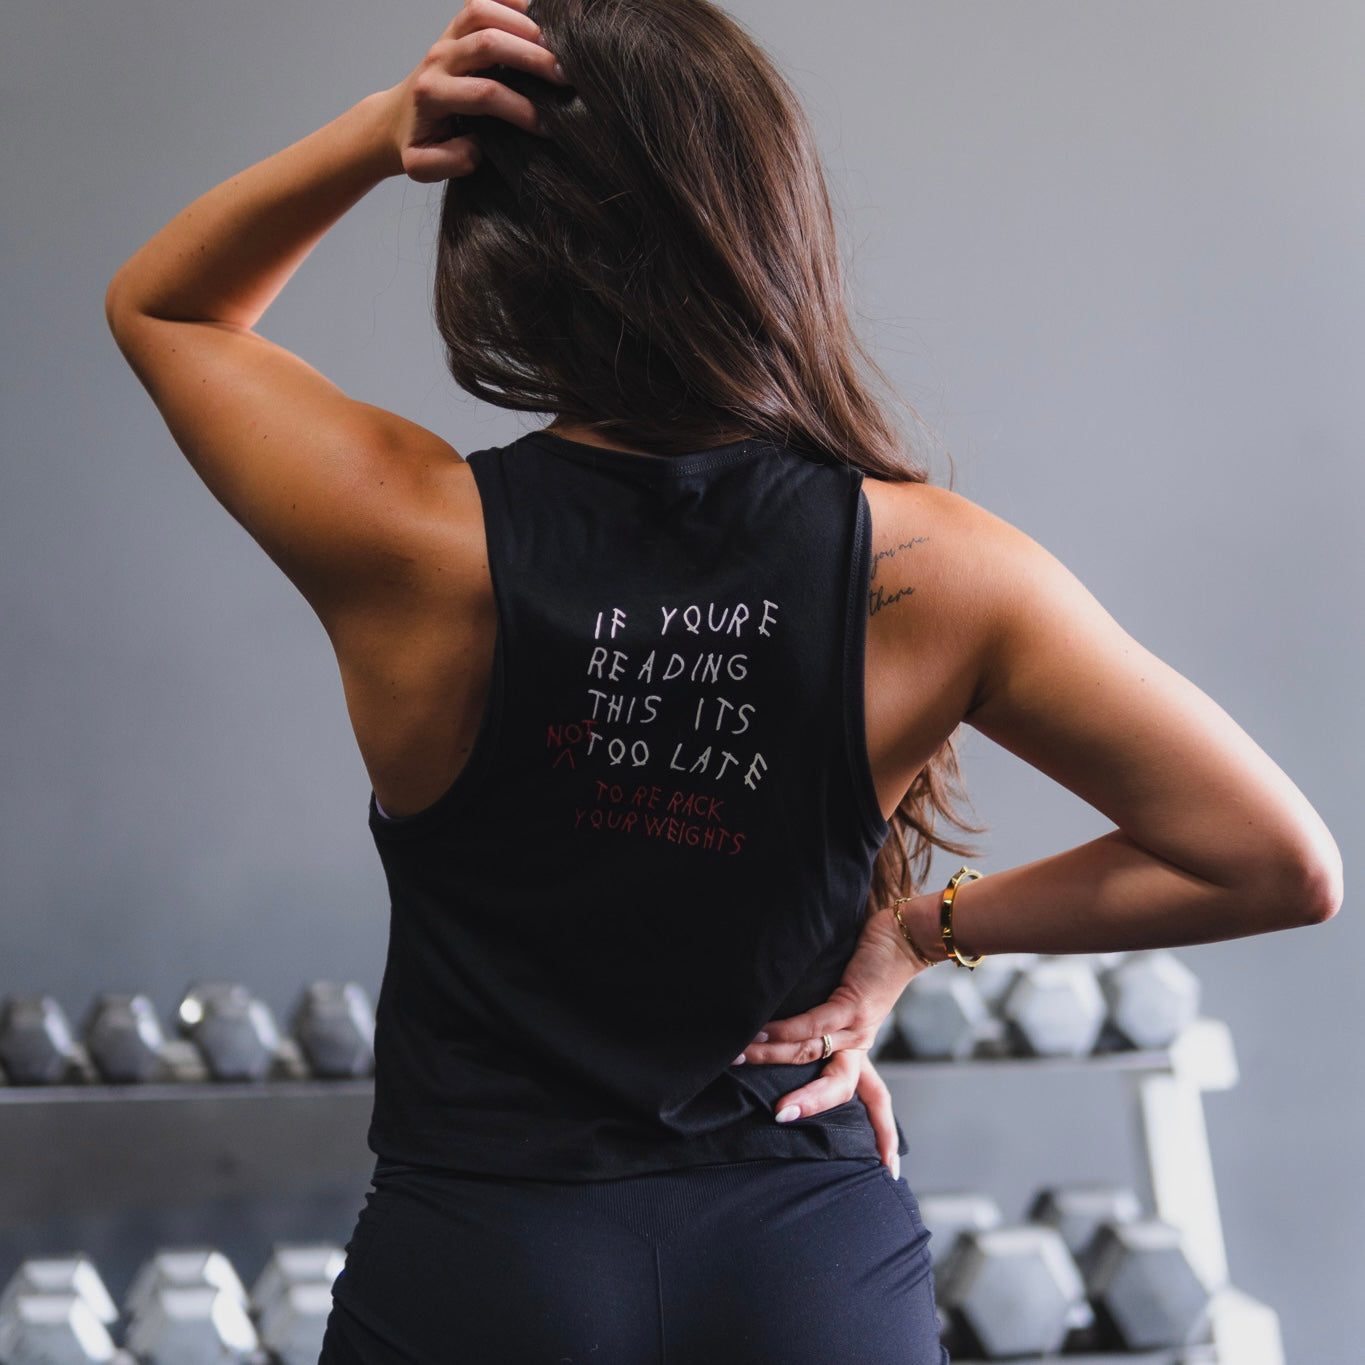 “If you’re reading this…” Women’s Crop Tank